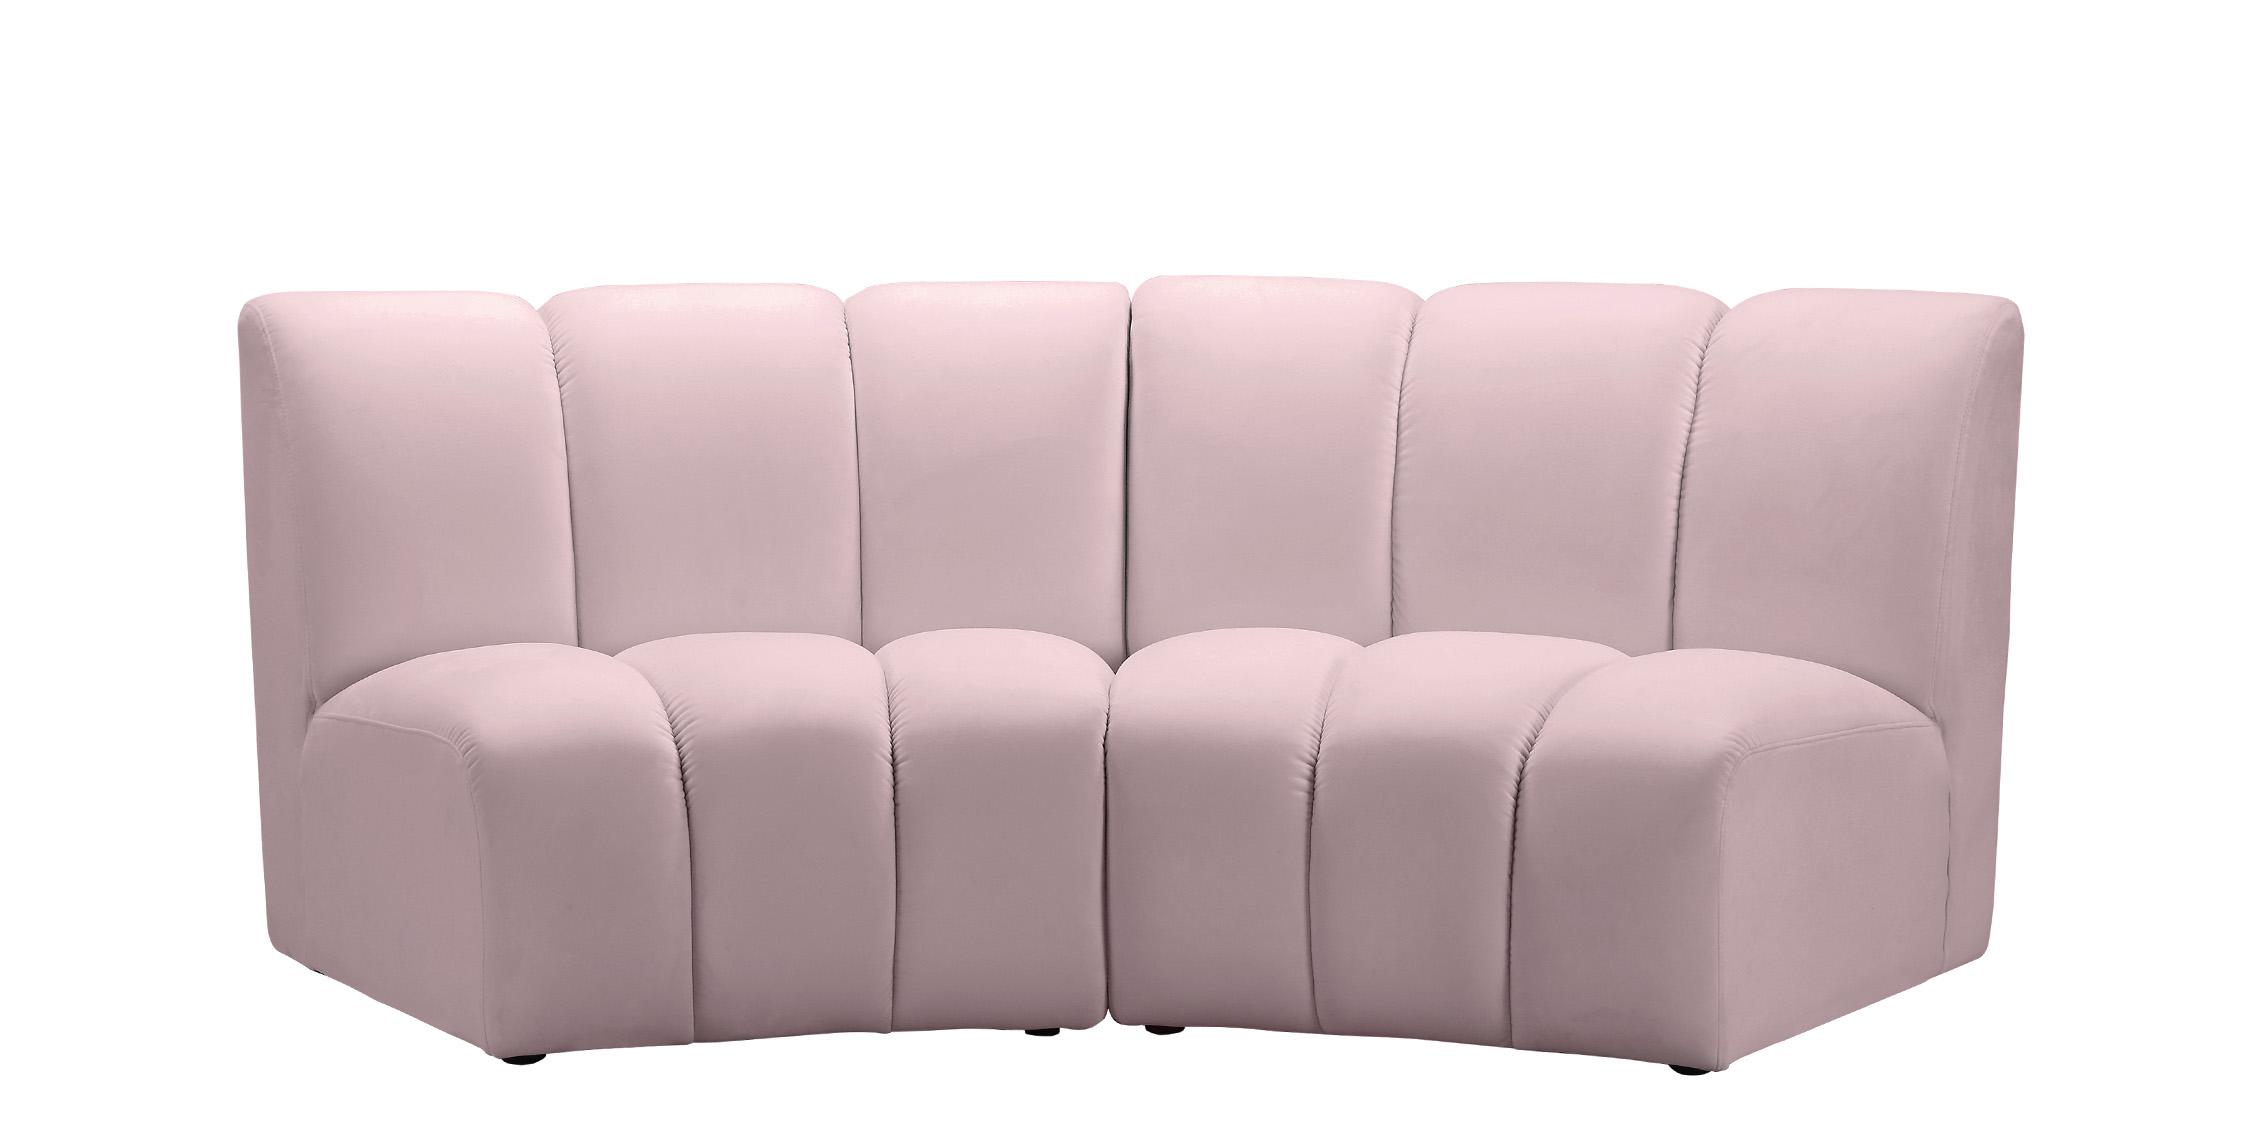 Contemporary, Modern Modular Sectional Sofa INFINITY 638Pink-2PC 638Pink-2PC in Pink Velvet